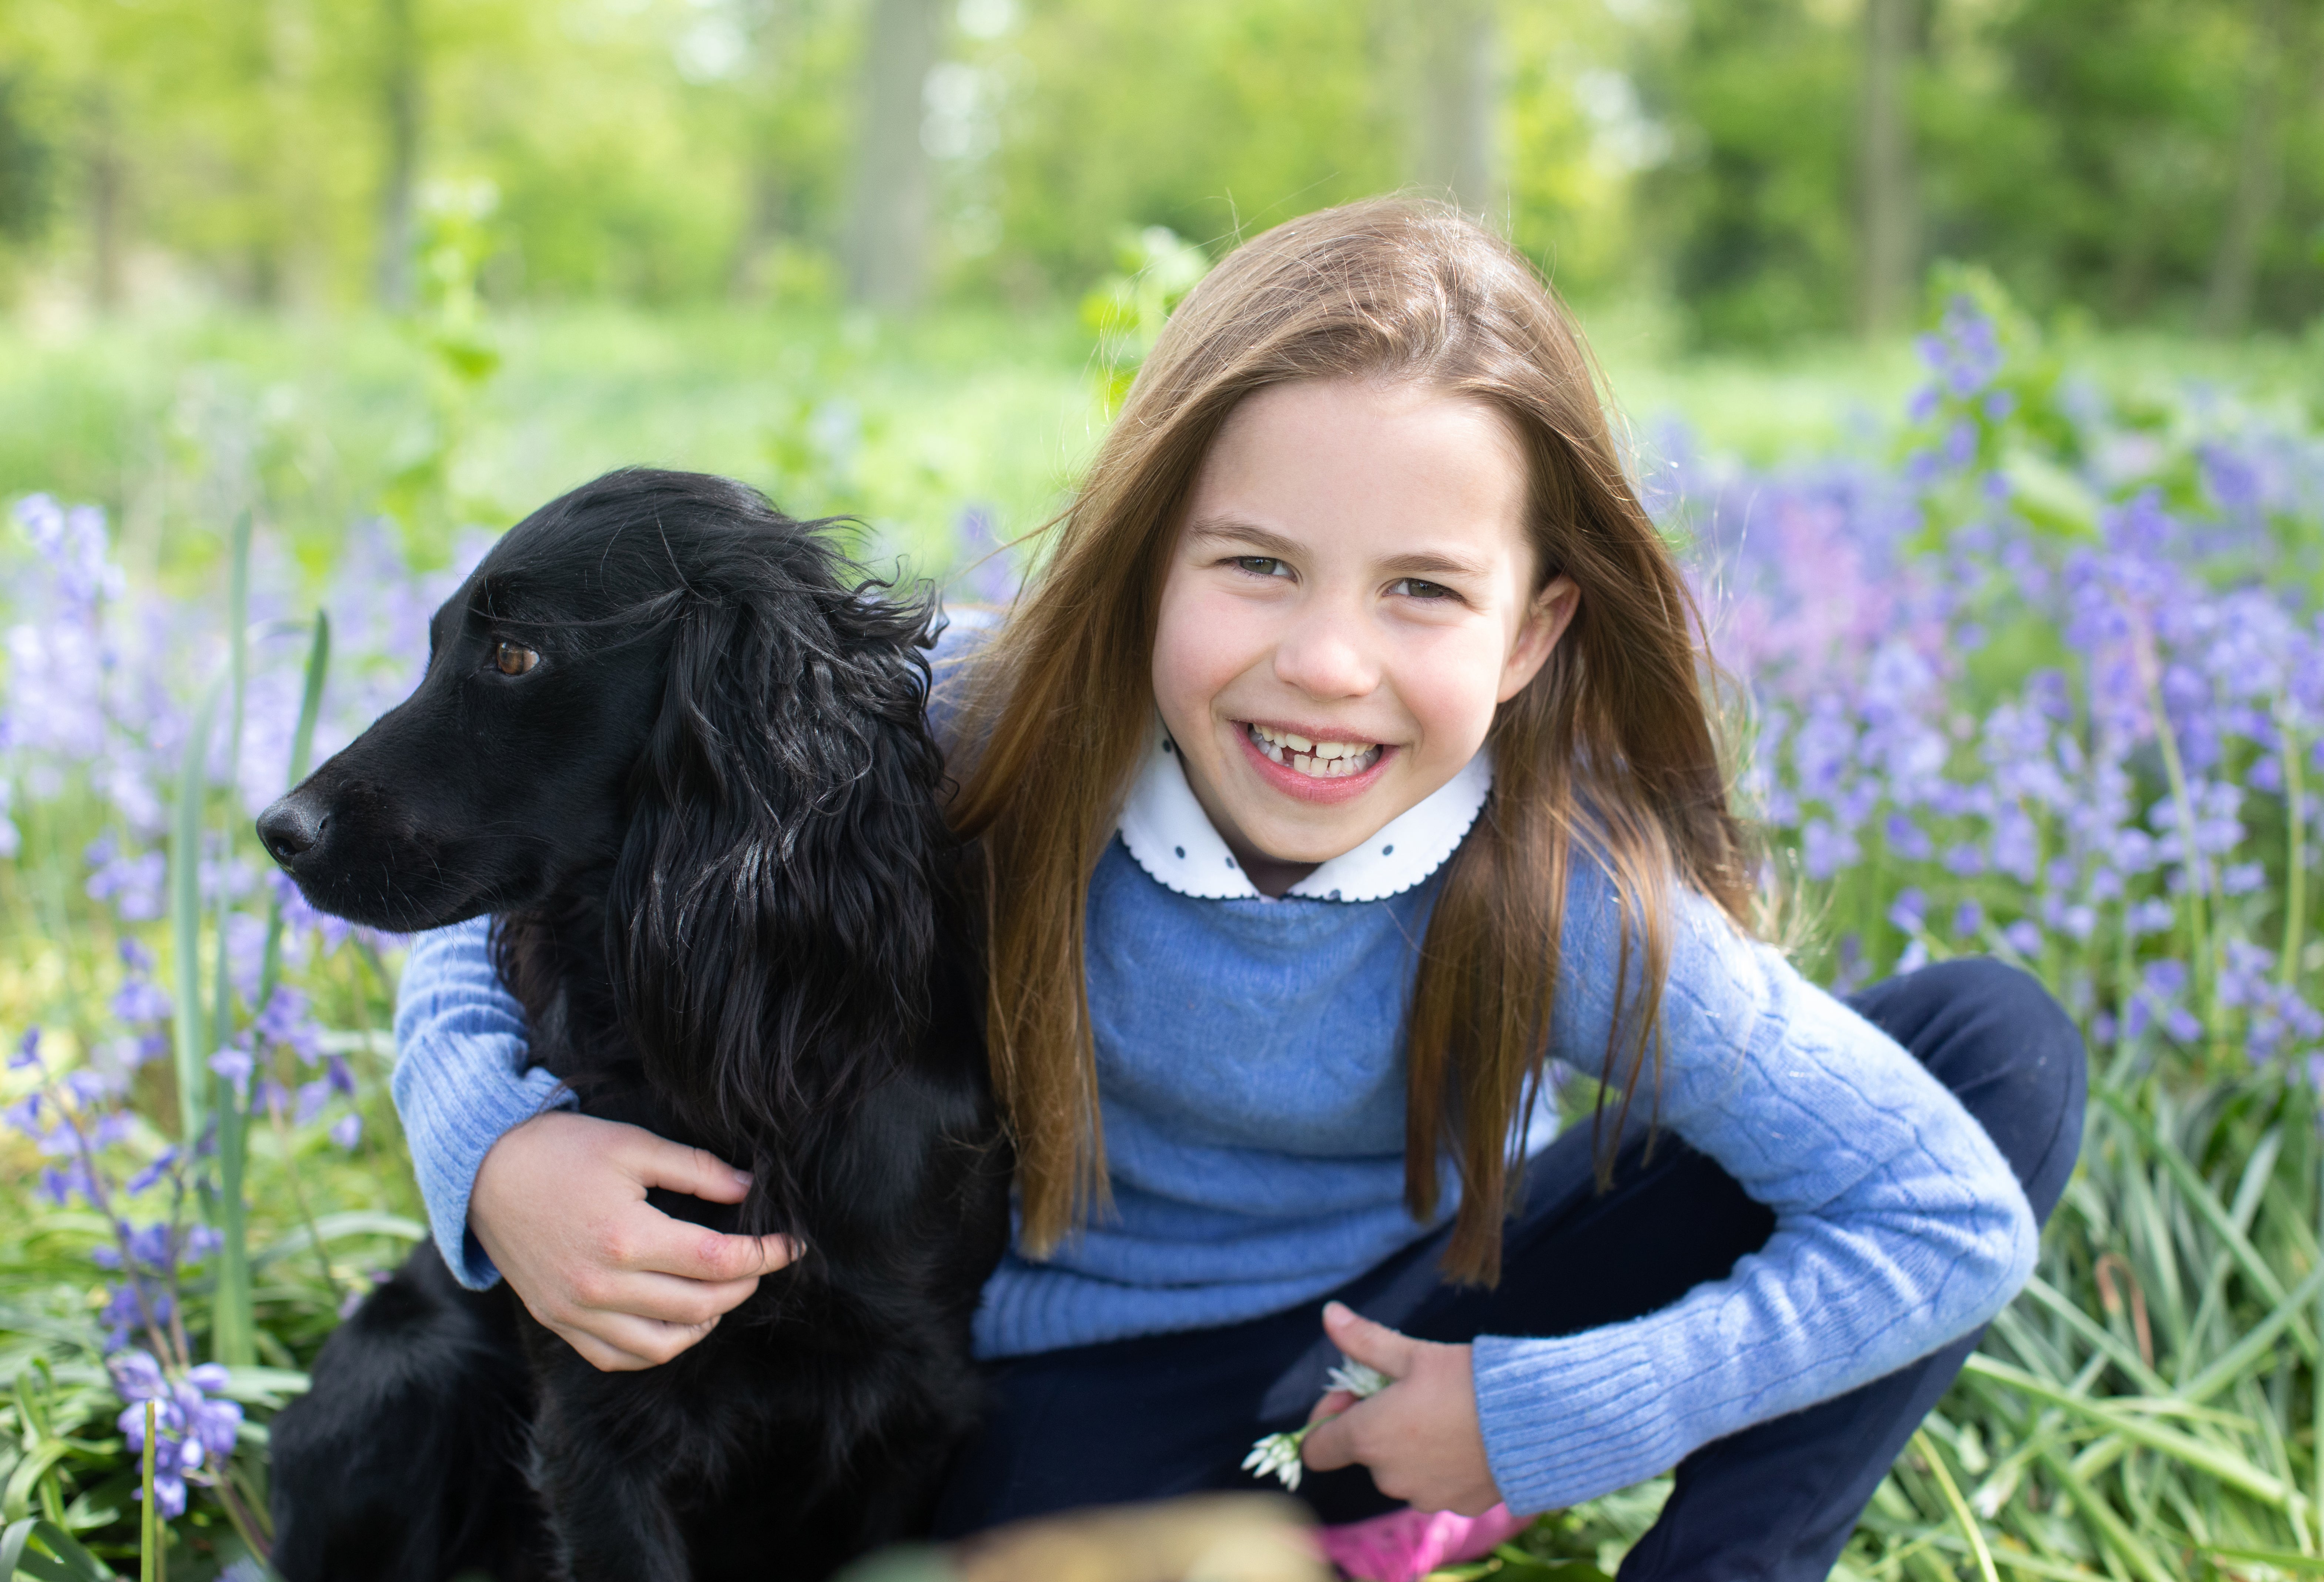 Princess Charlotte Duchess of Cambridge releases new photos of daughter and pet dog to mark seventh birthday The Independent pic